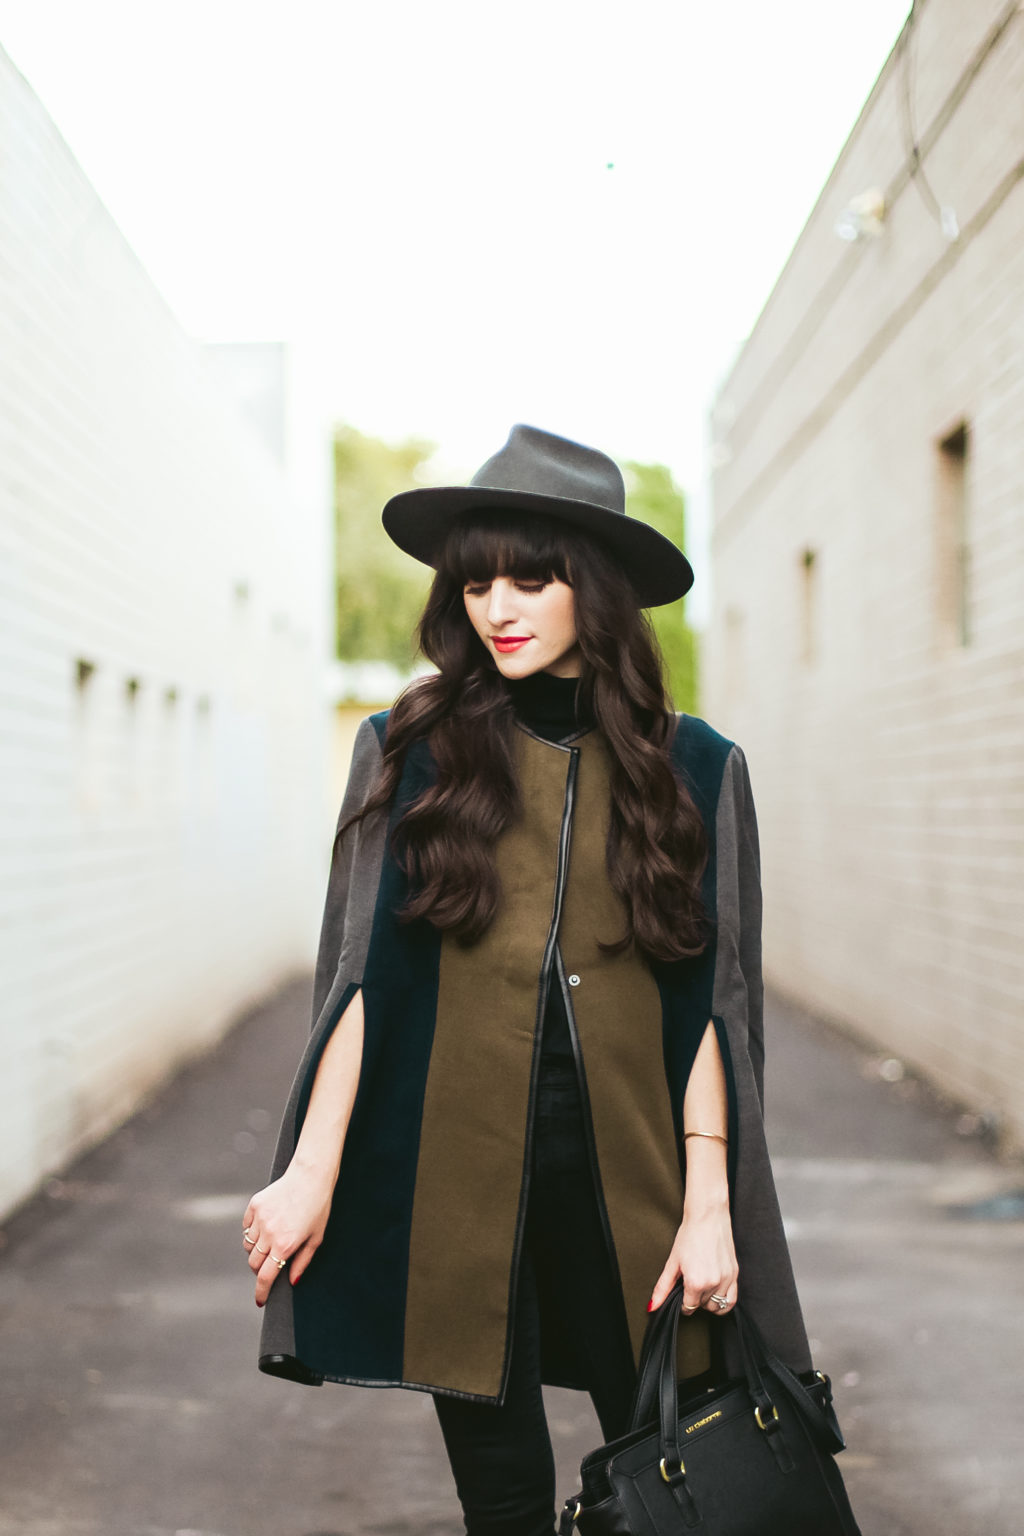 New Darlings - Day to Night Fall Inspired Looks with JCPenney - Black Turtleneck Colorblock Cape